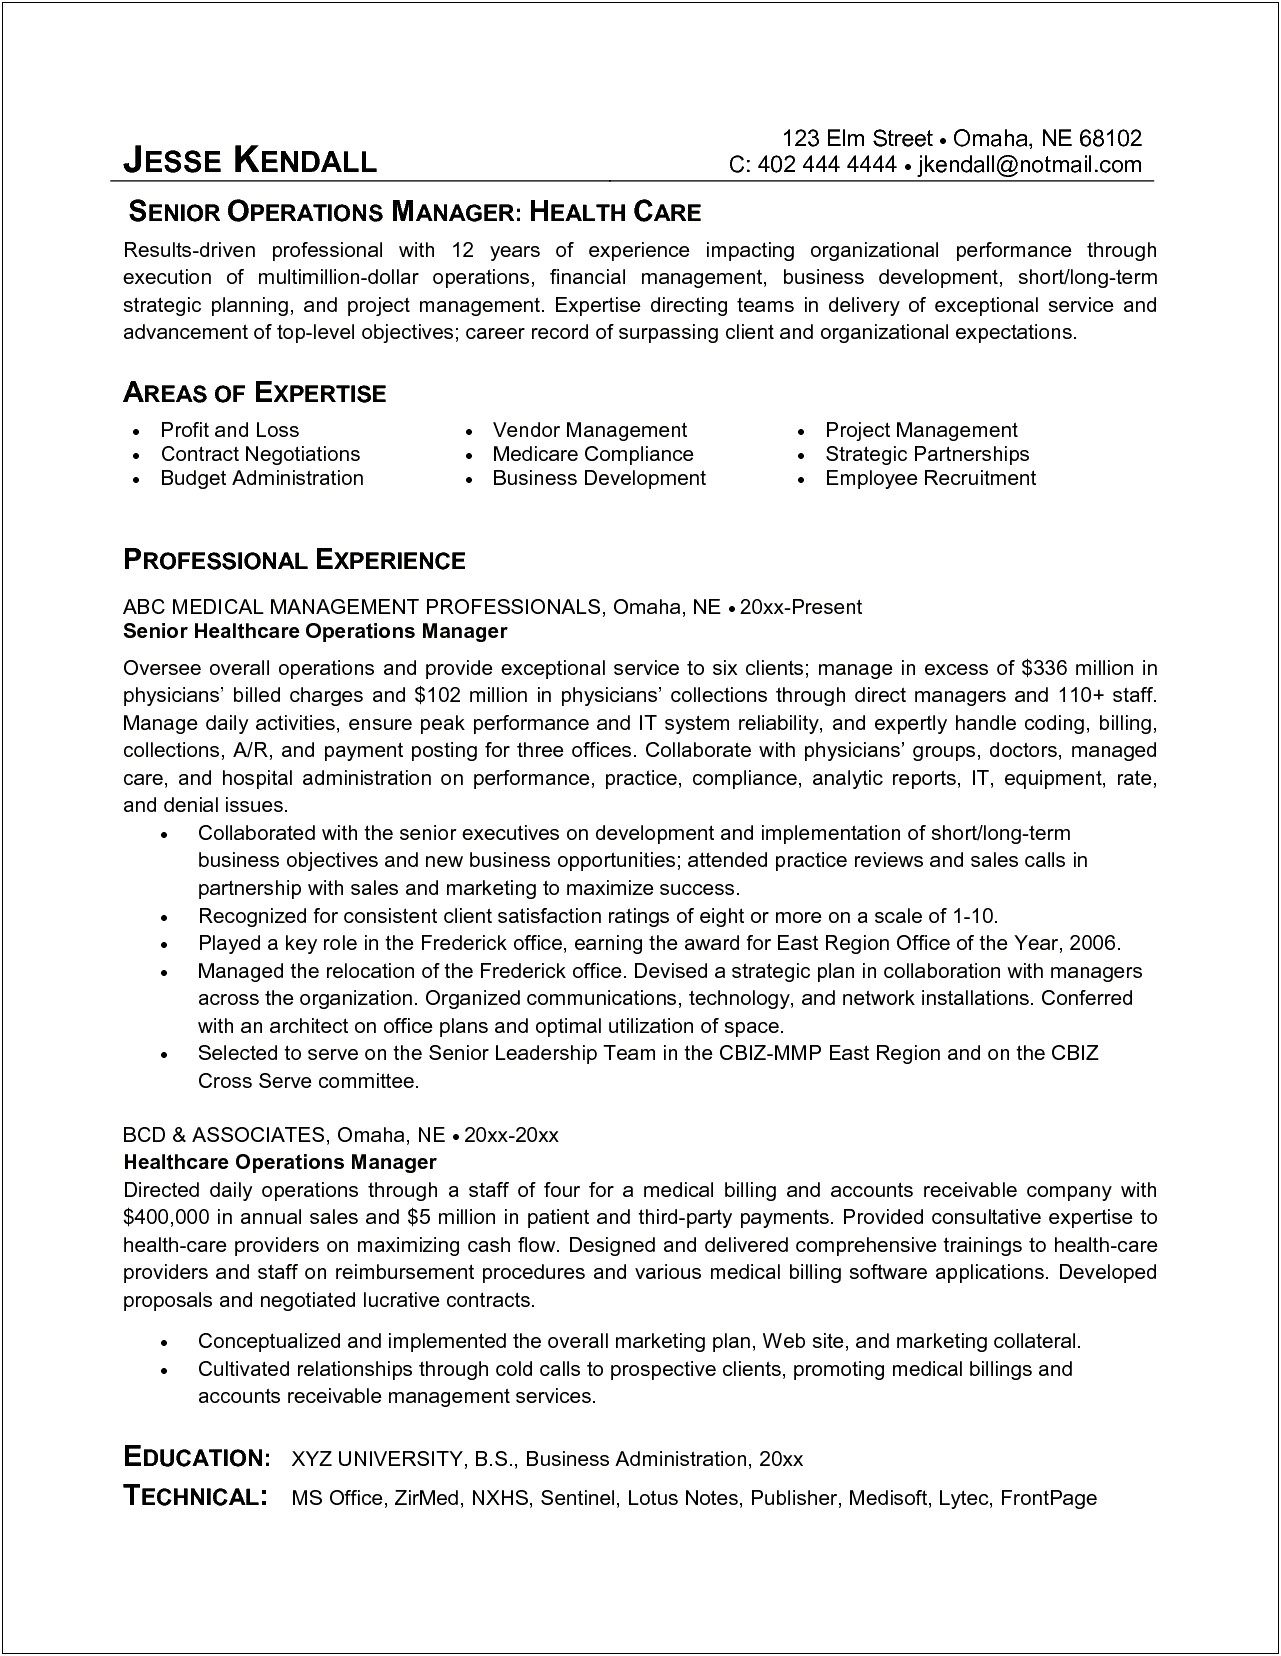 Career Objective Examples For Healthcare Resume